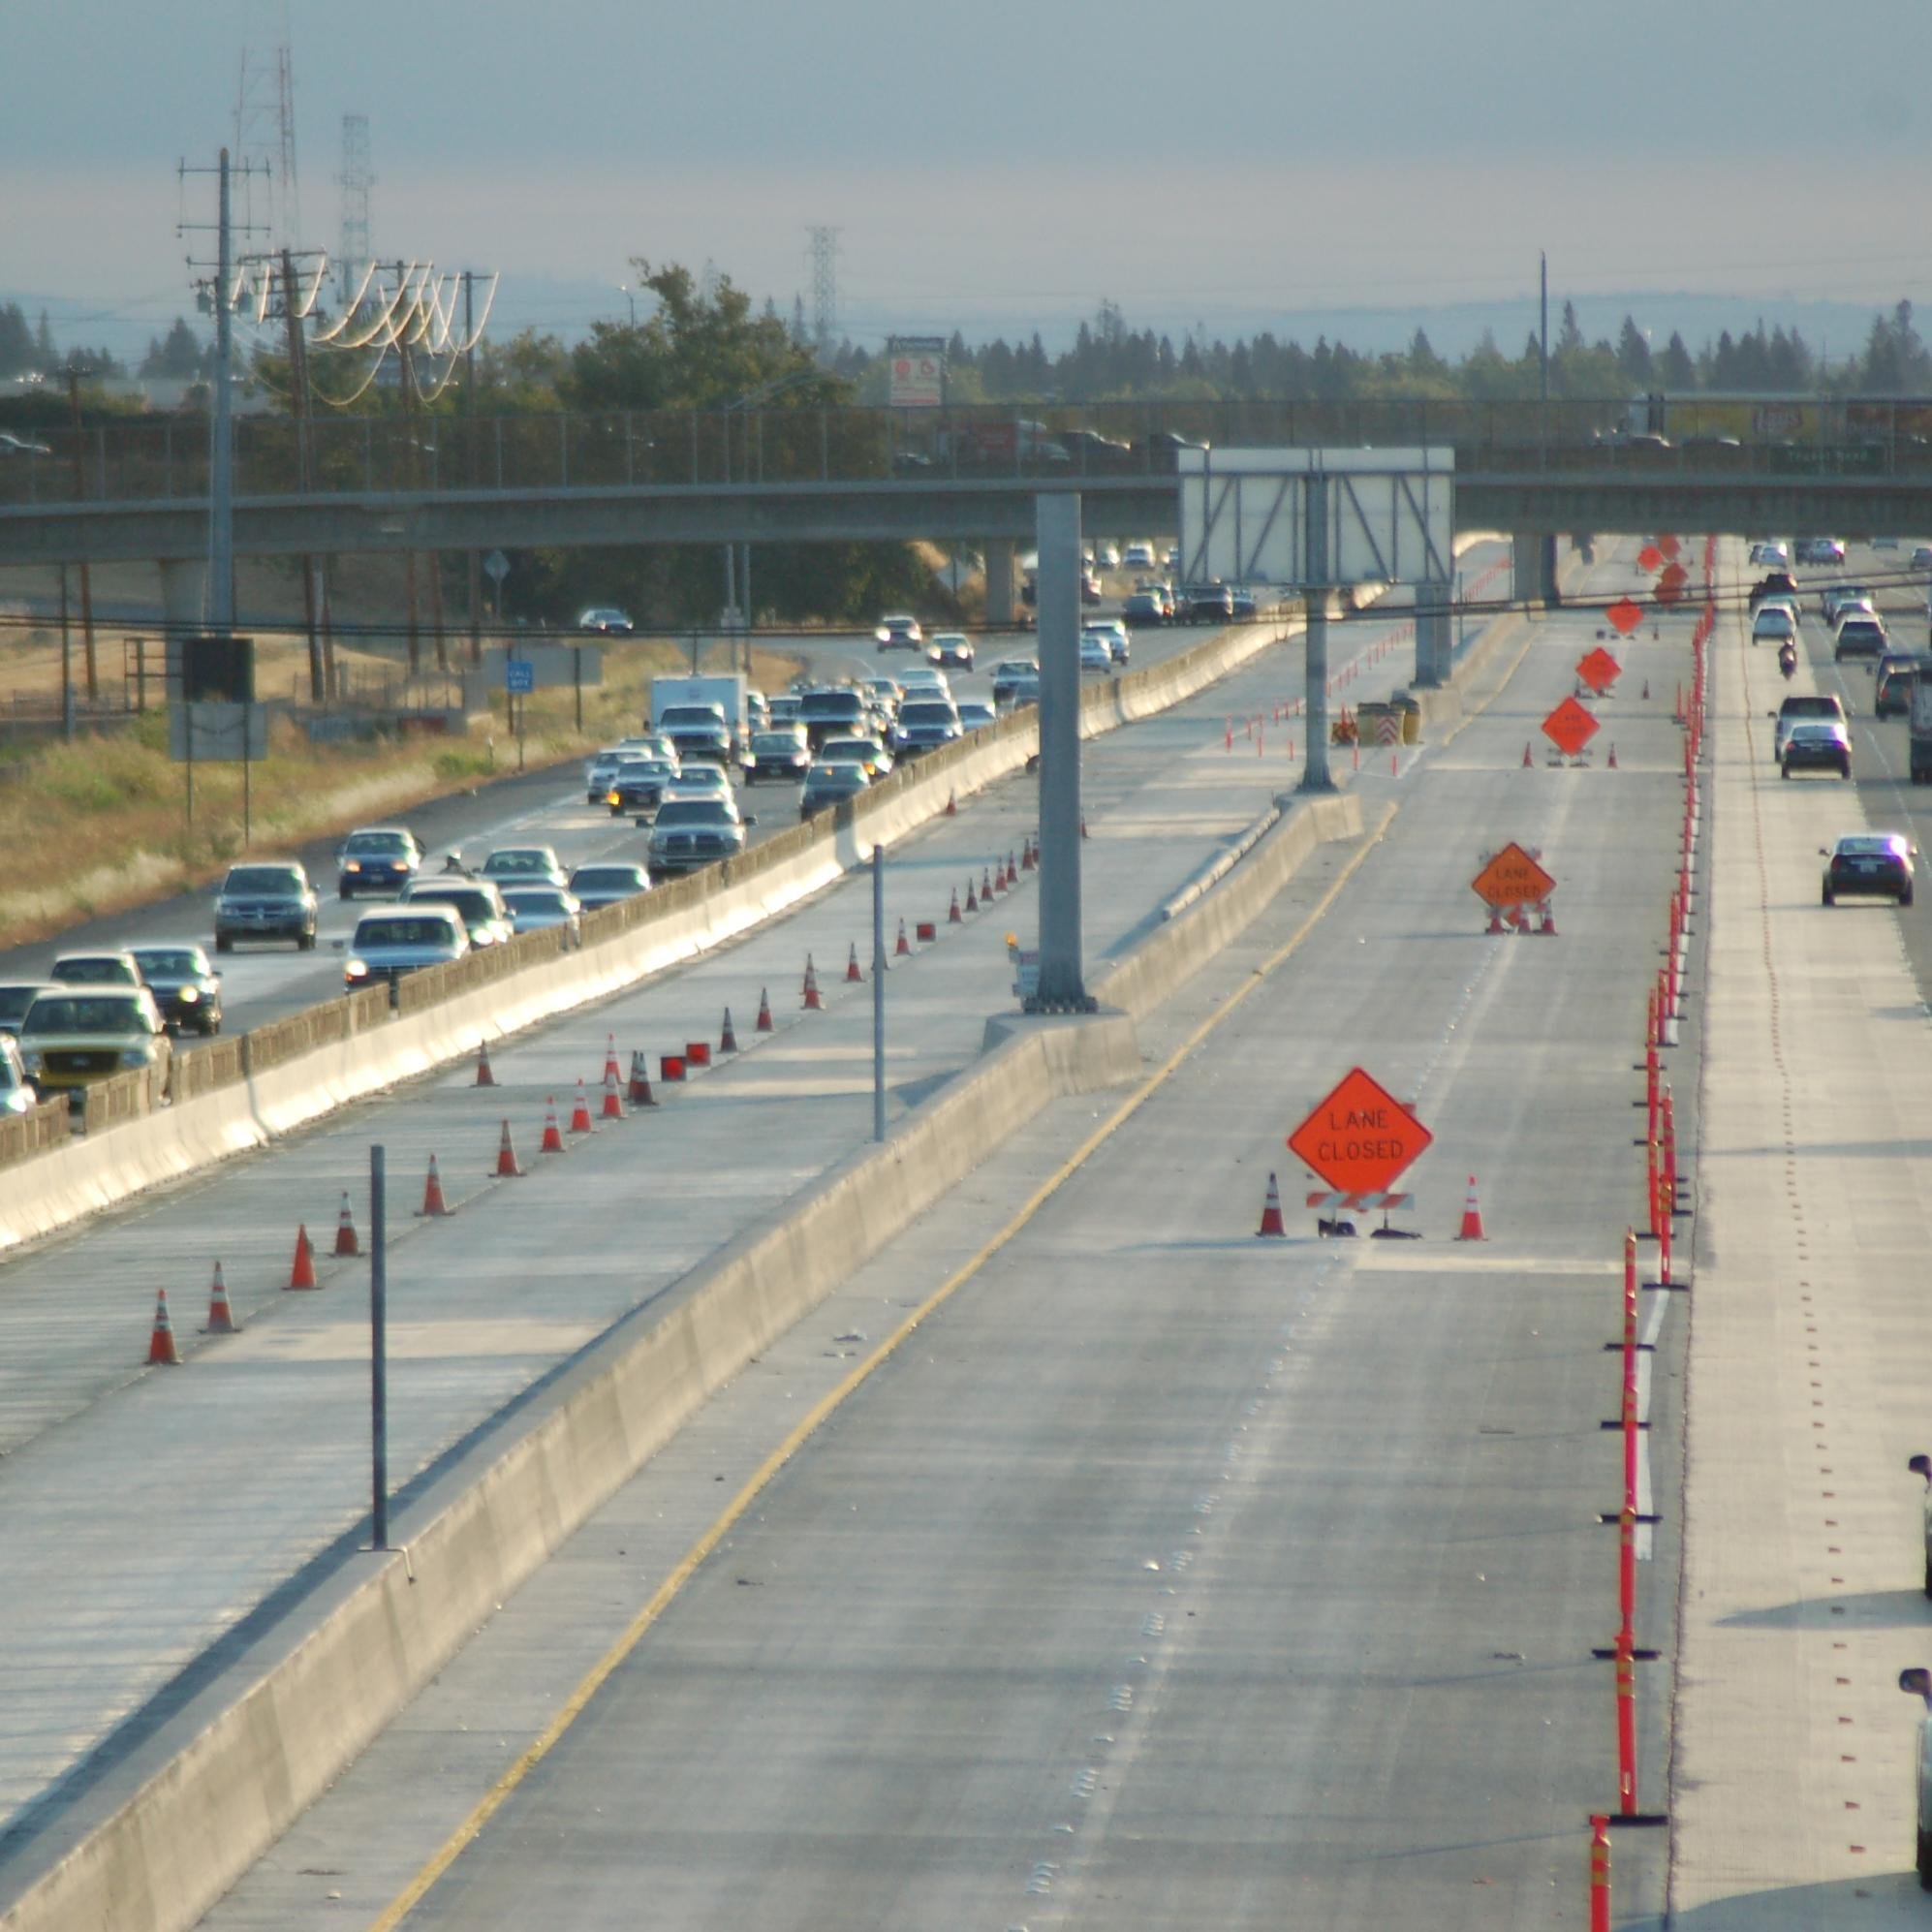 The $133 million Interstate 80 Across the Top project is building 10 miles of bus/carpool lanes and repaving from West El Camino Avenue to Watt Avenue.